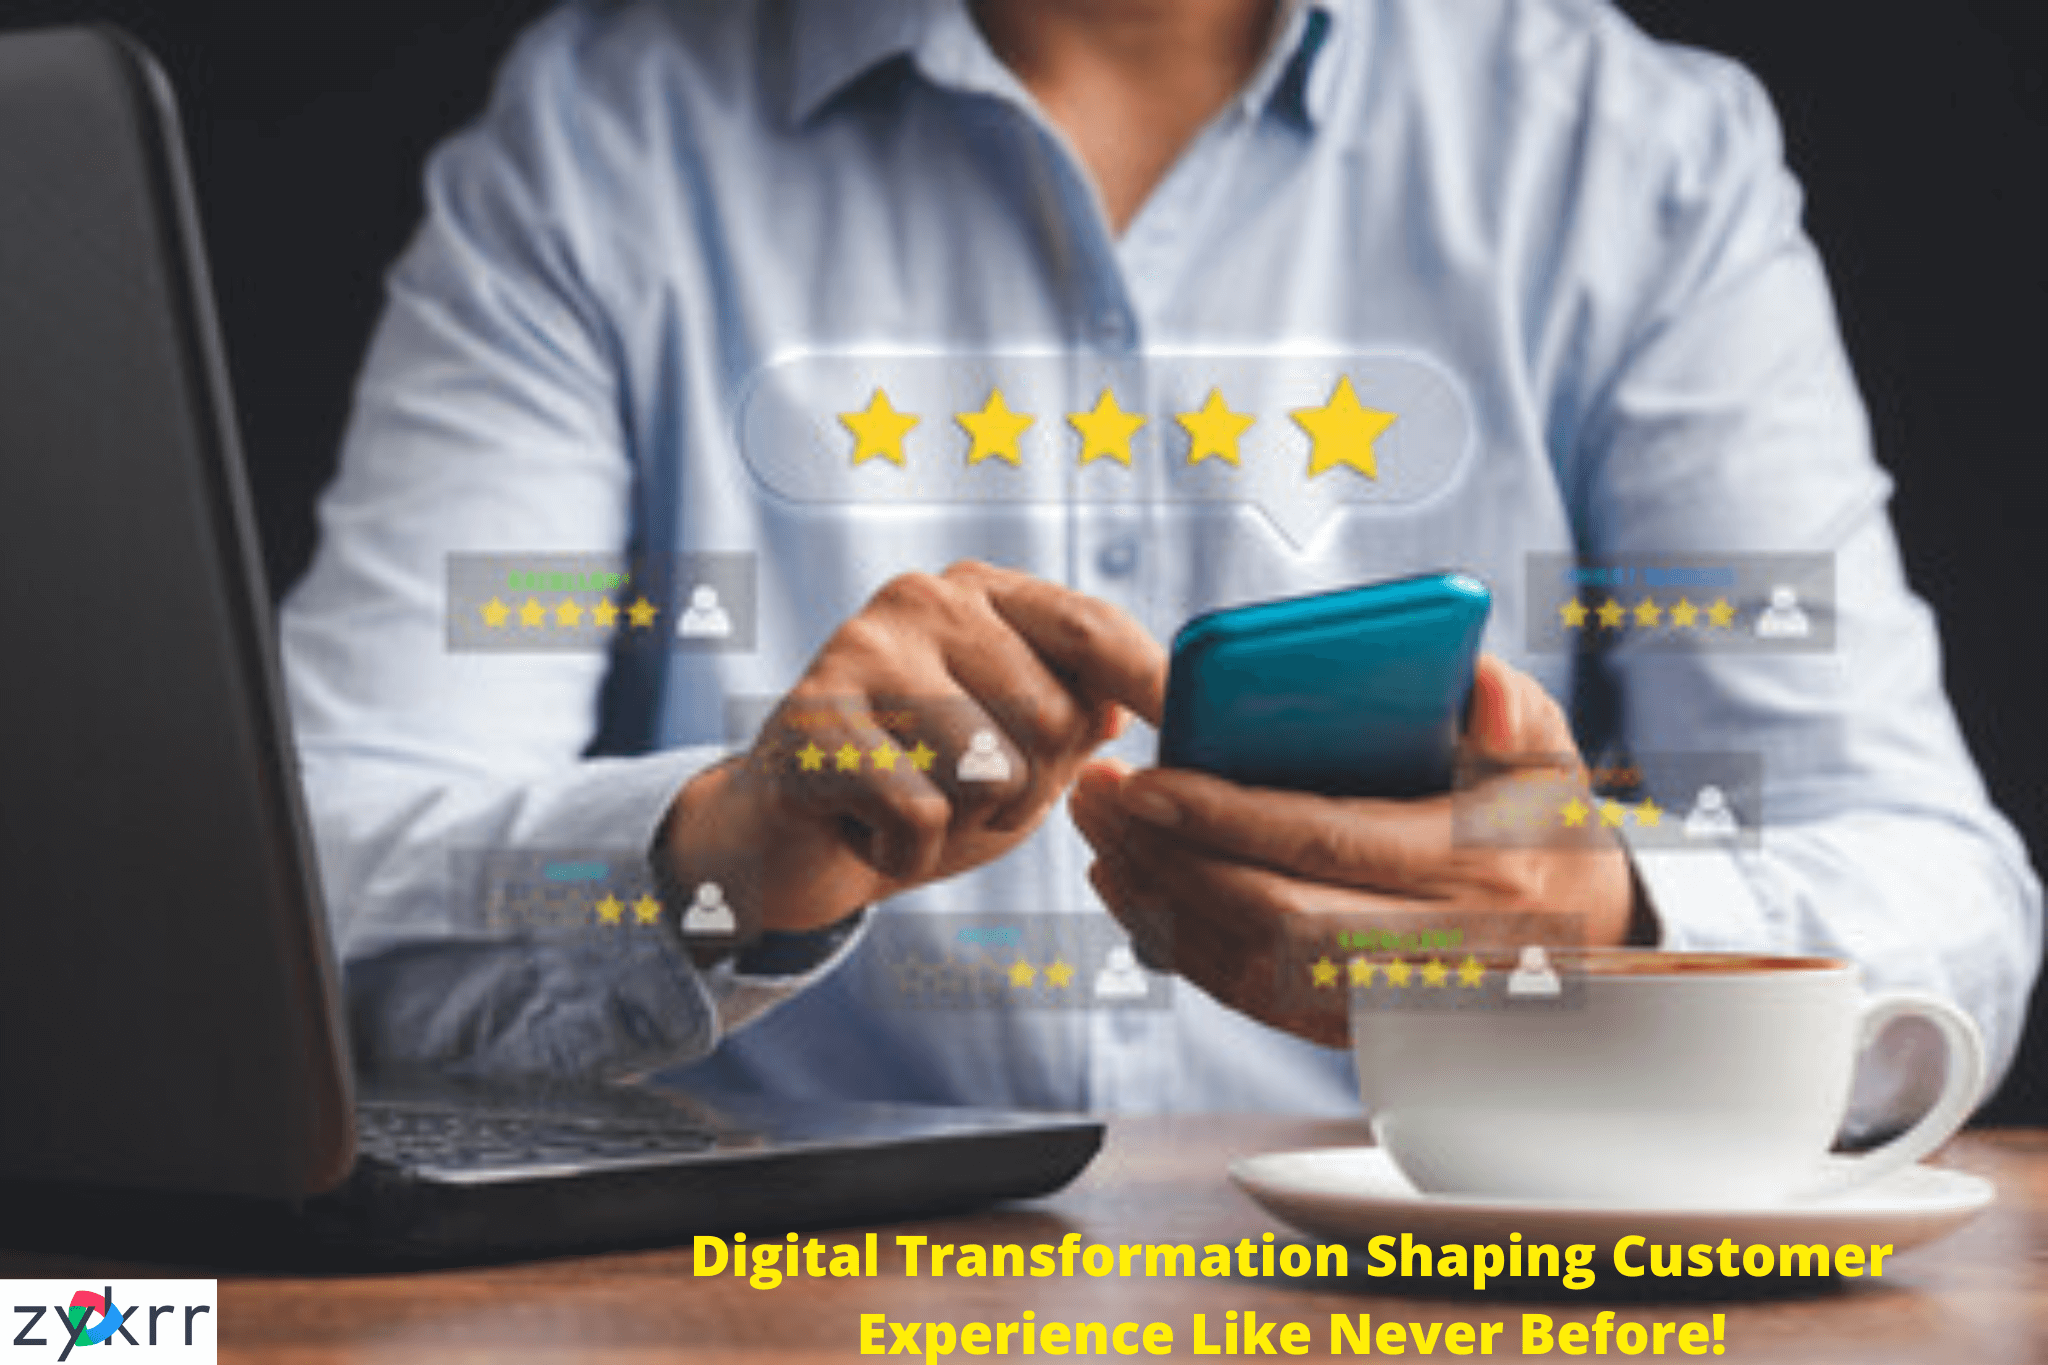 Digital Transformation shaping Customer Experience like Never Before!